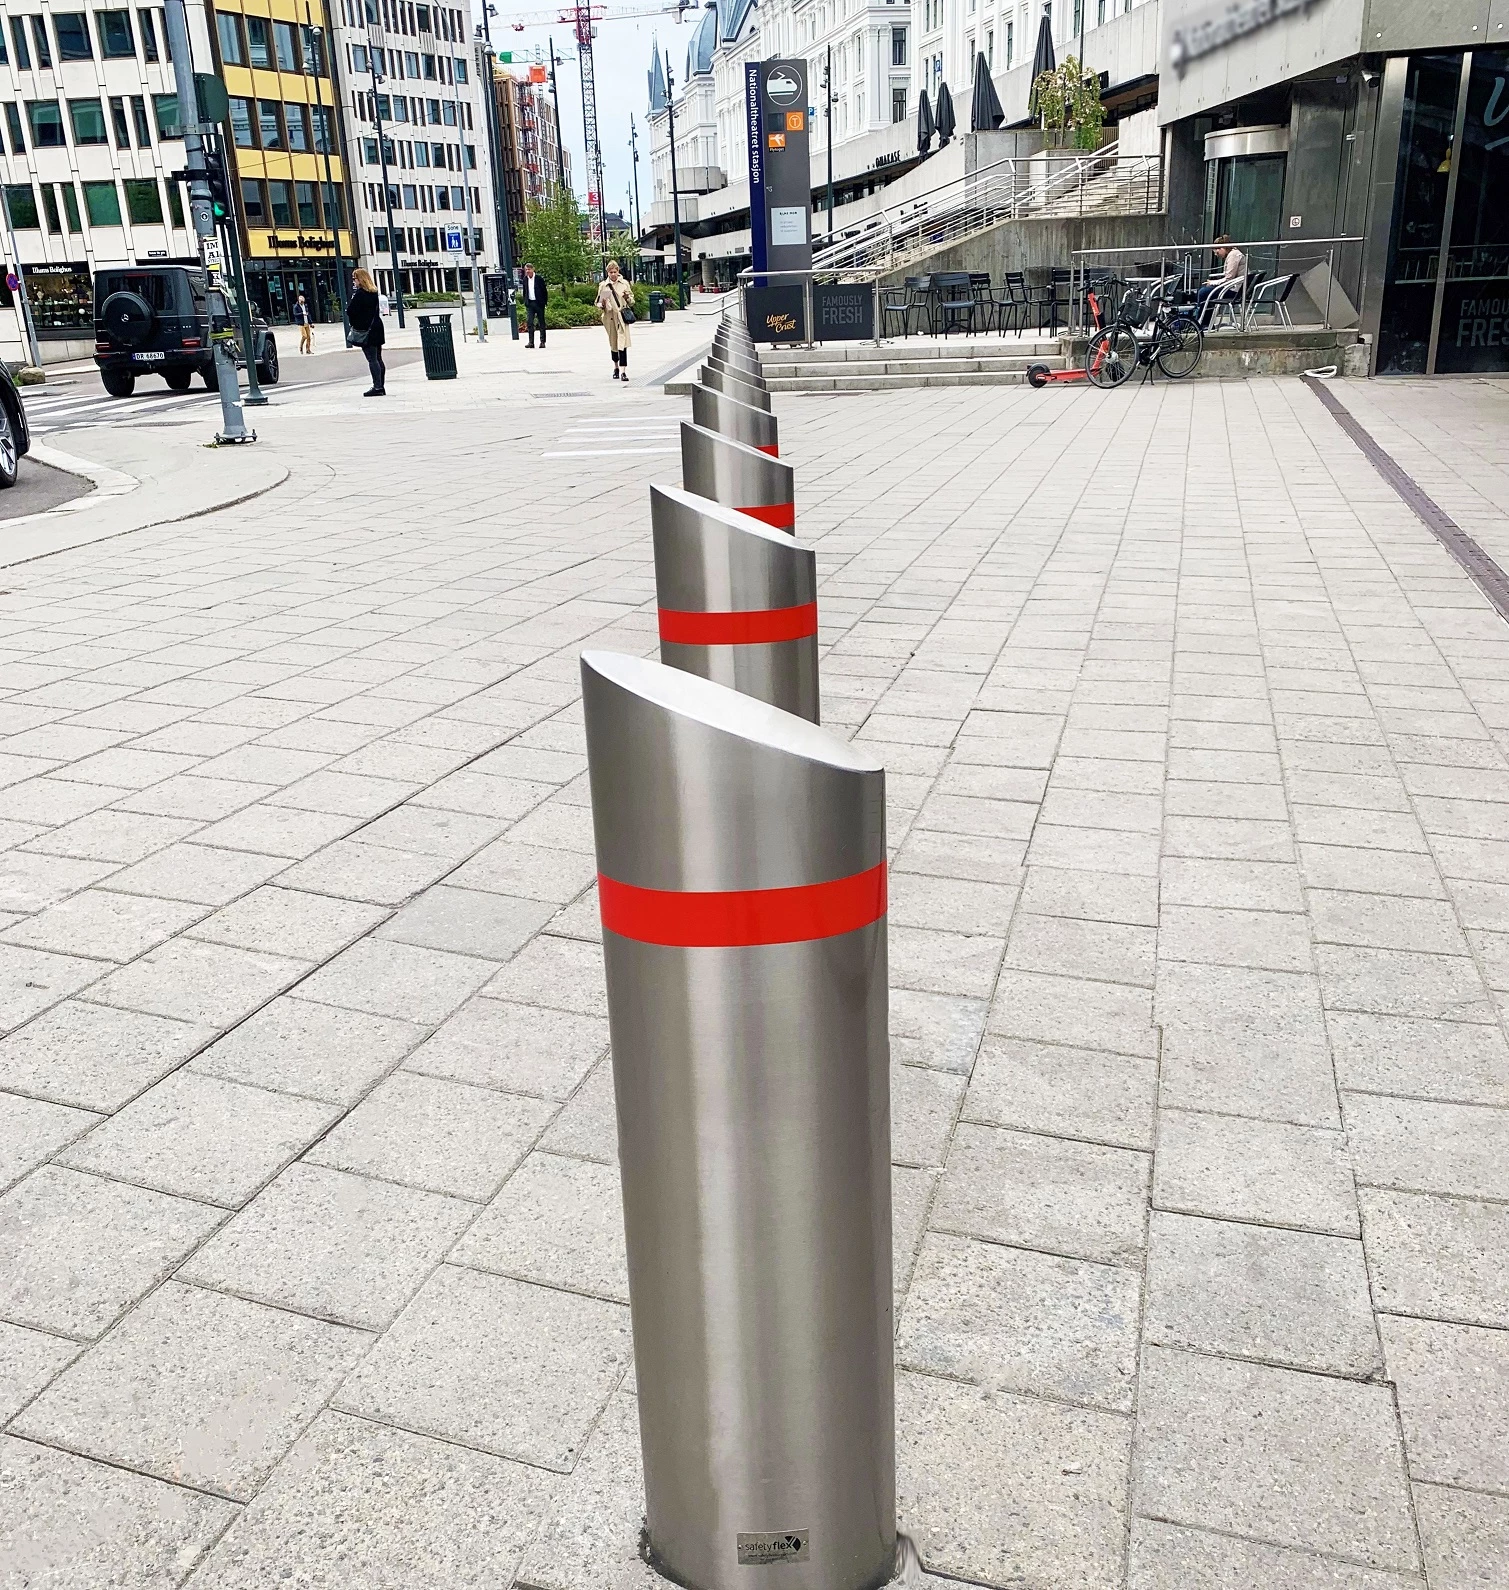 An installation of Truckstopper bollards, designed and manufactured by Safetyflex Barriers, in Norway.